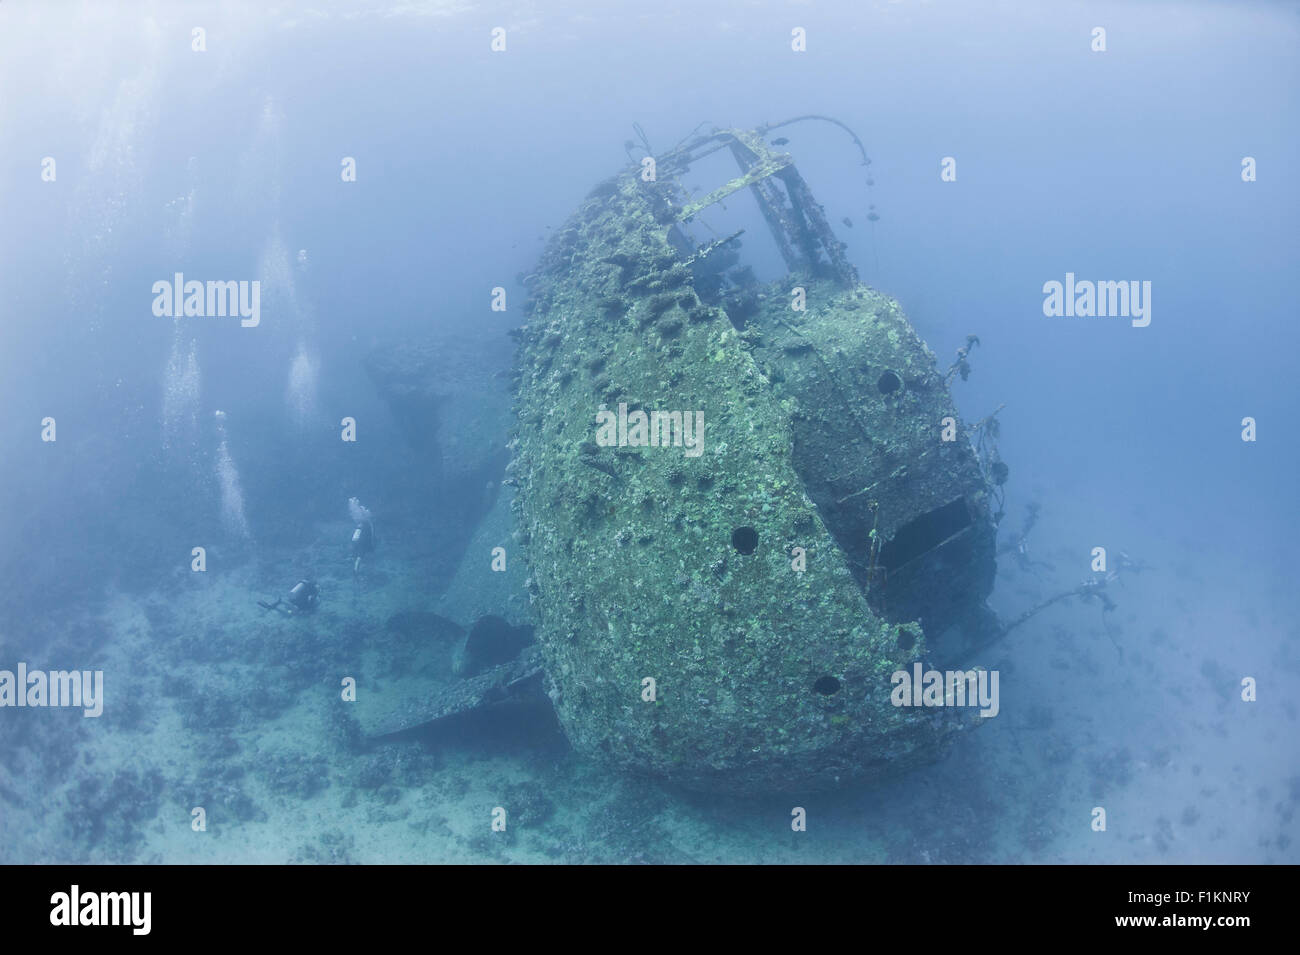 Scuba divers exploring the stern section of a large underwater shipwreck Stock Photo